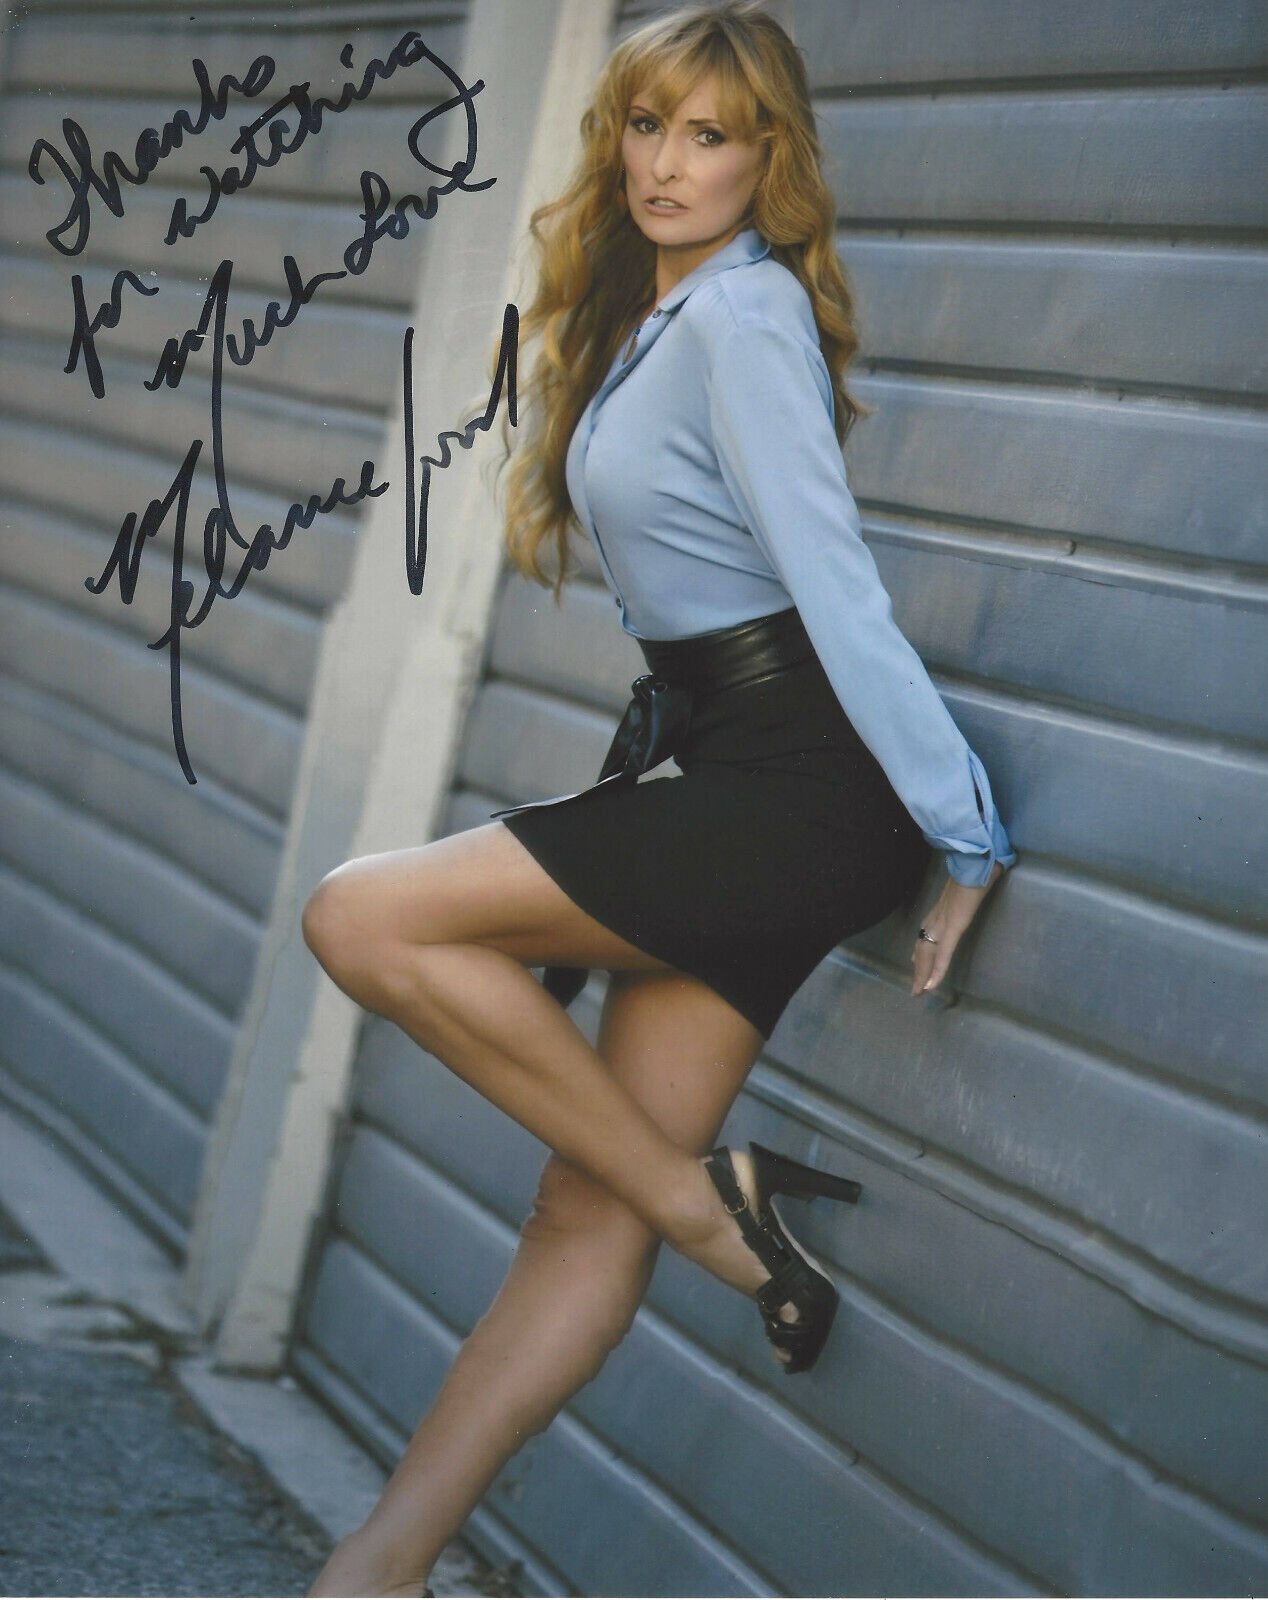 MELANIE GOOD SIGNED AUTHENTIC 'PRIVATE PARTS' 8x10 Photo Poster painting B w/COA MODEL ACTRESS